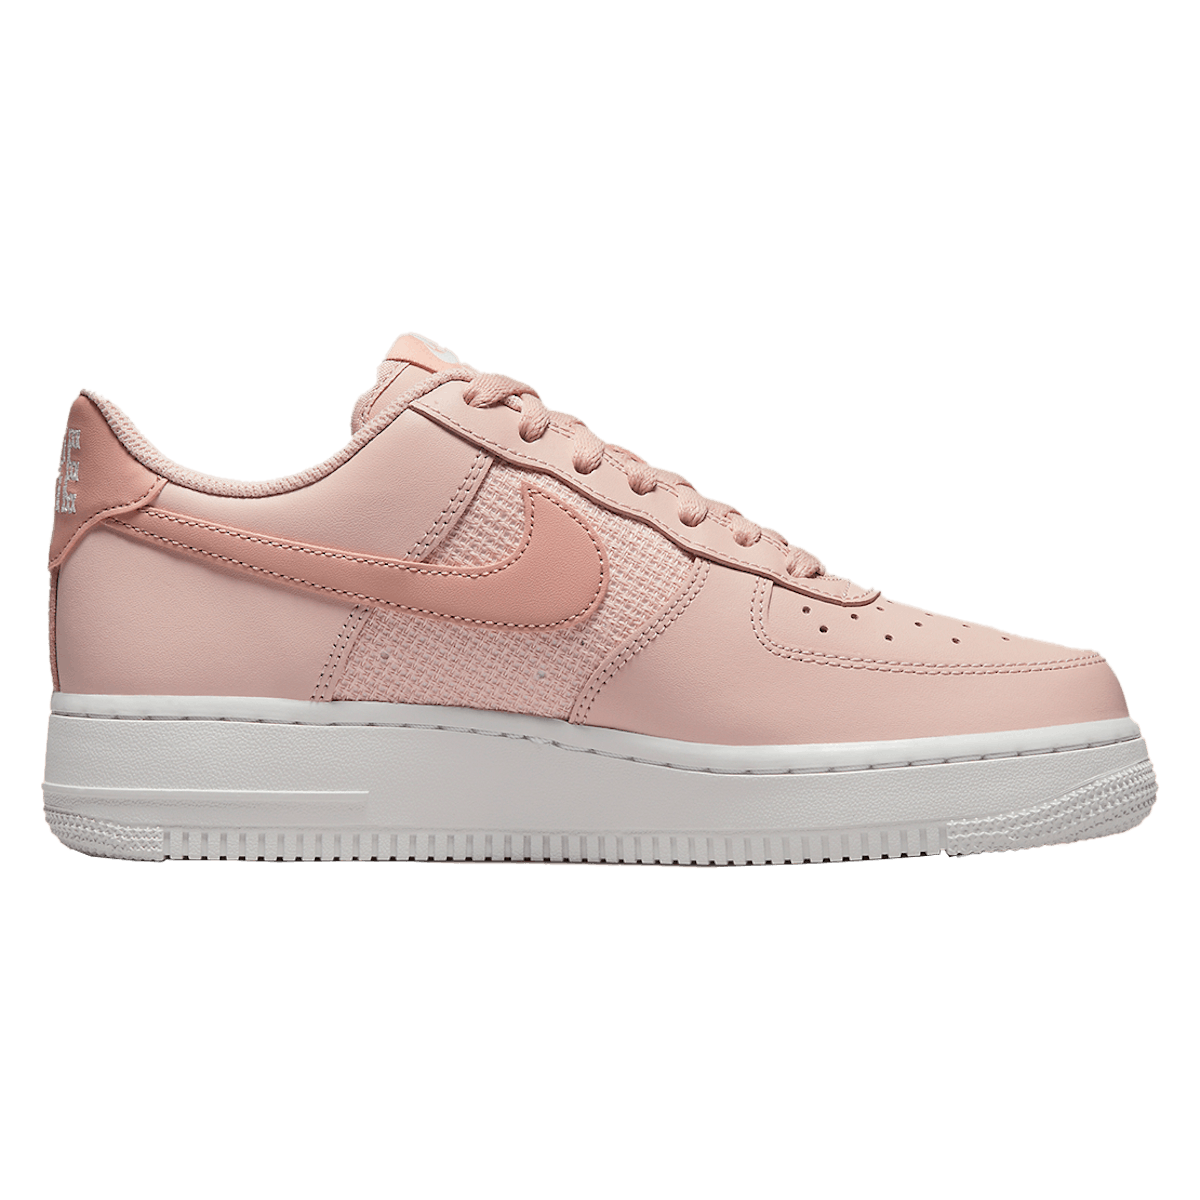 Nike Air Force 1 Low WMNS "Cross Stitch Pink"